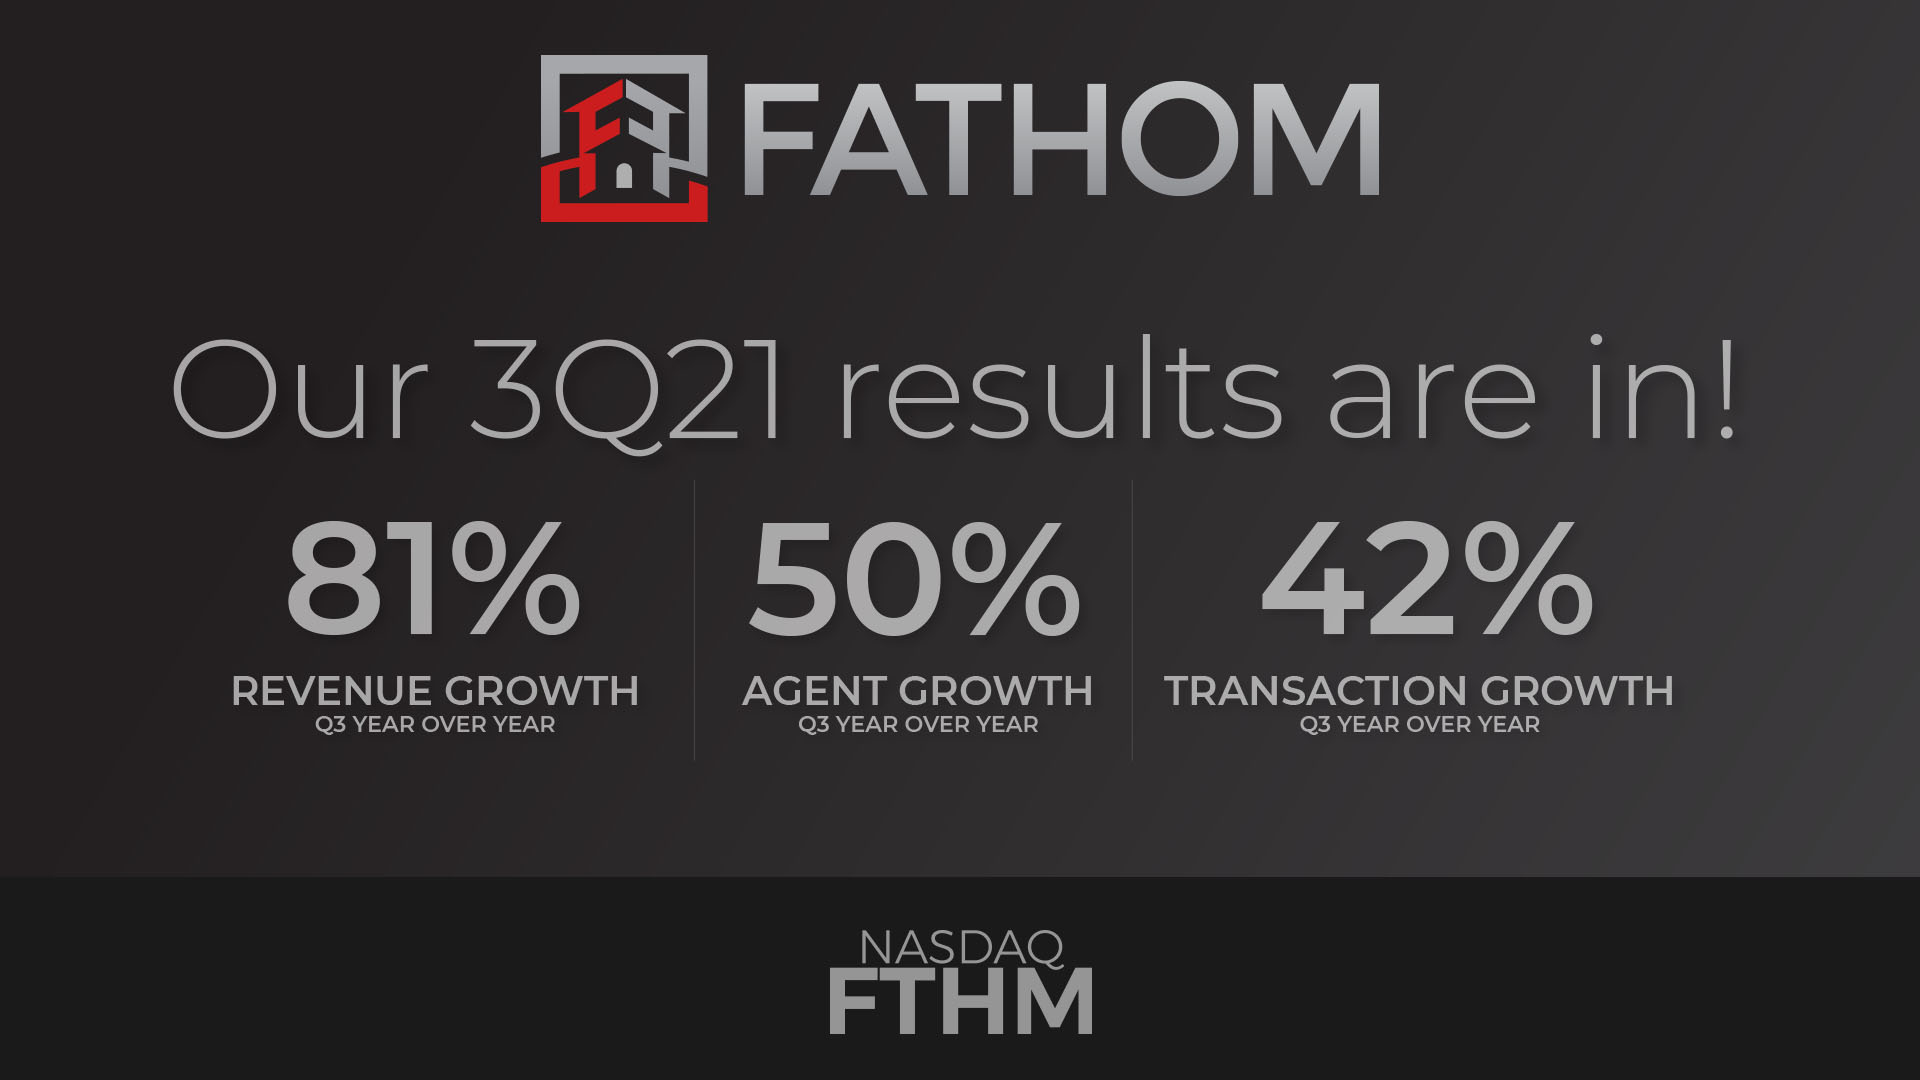 Featured image for “Fathom Holdings Inc. Third Quarter 2021 Earnings Report”